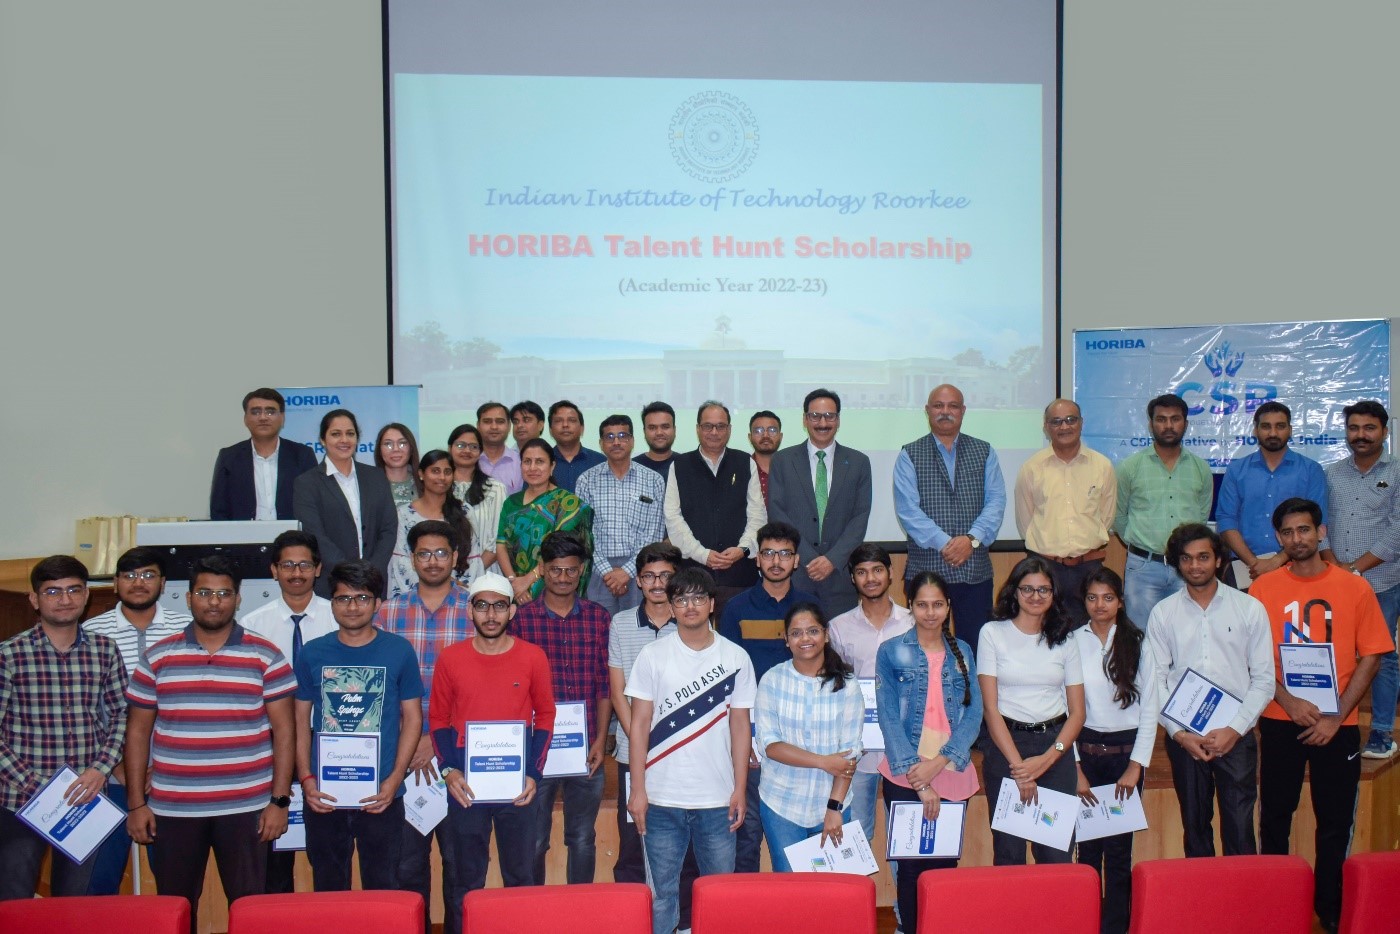 You are currently viewing Students of IIT Roorkee awarded with HORIBA Talent Hunt Scholarship 2022-23